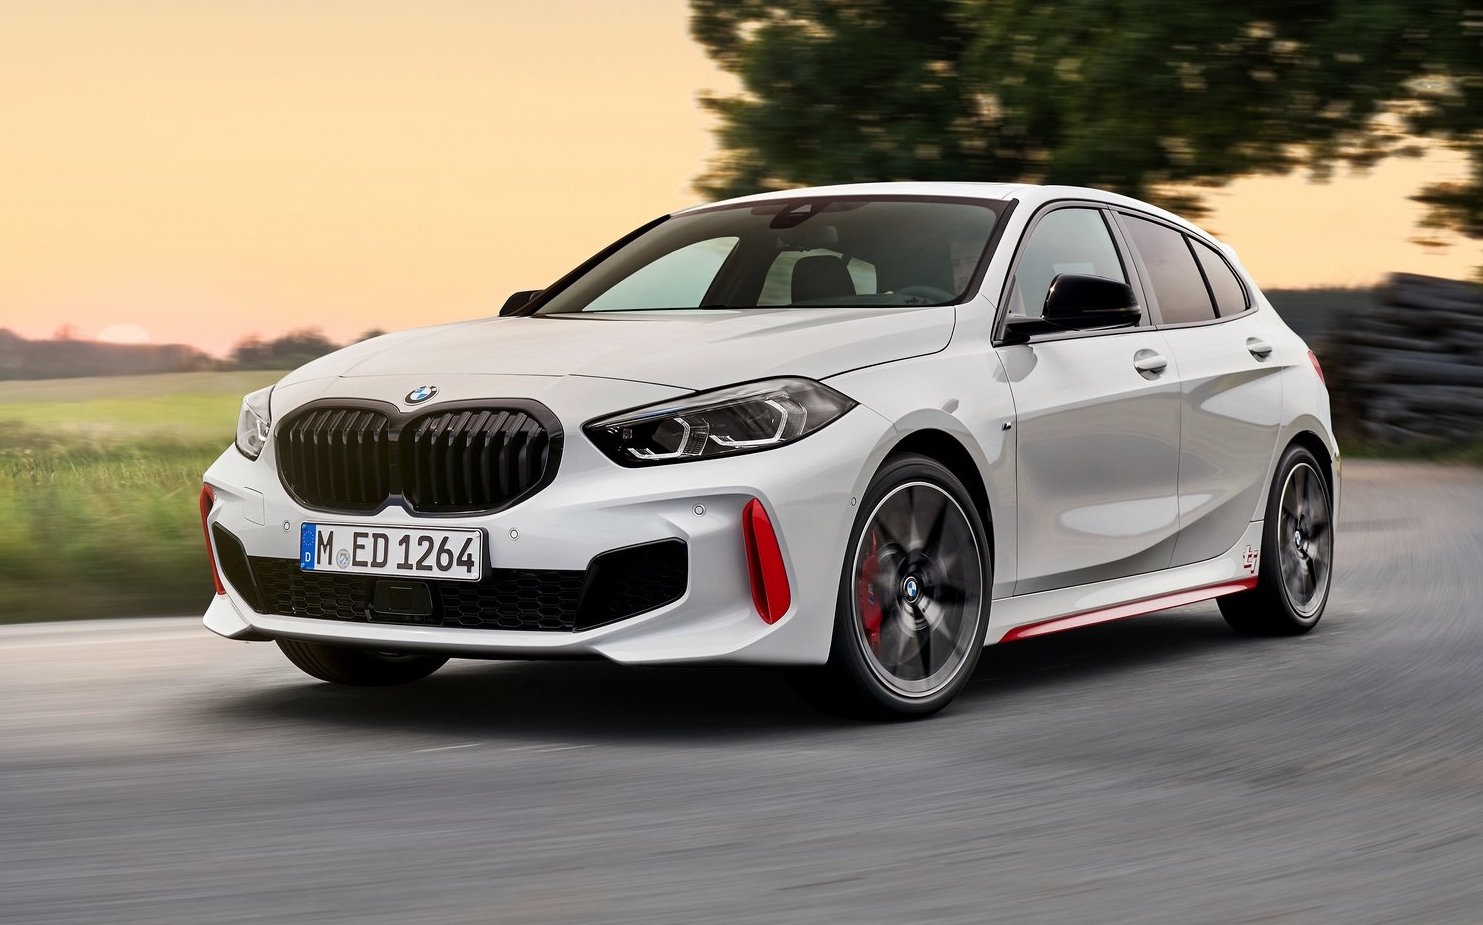 BMW 128ti on sale in Australia from $56,900, arrives early 2021